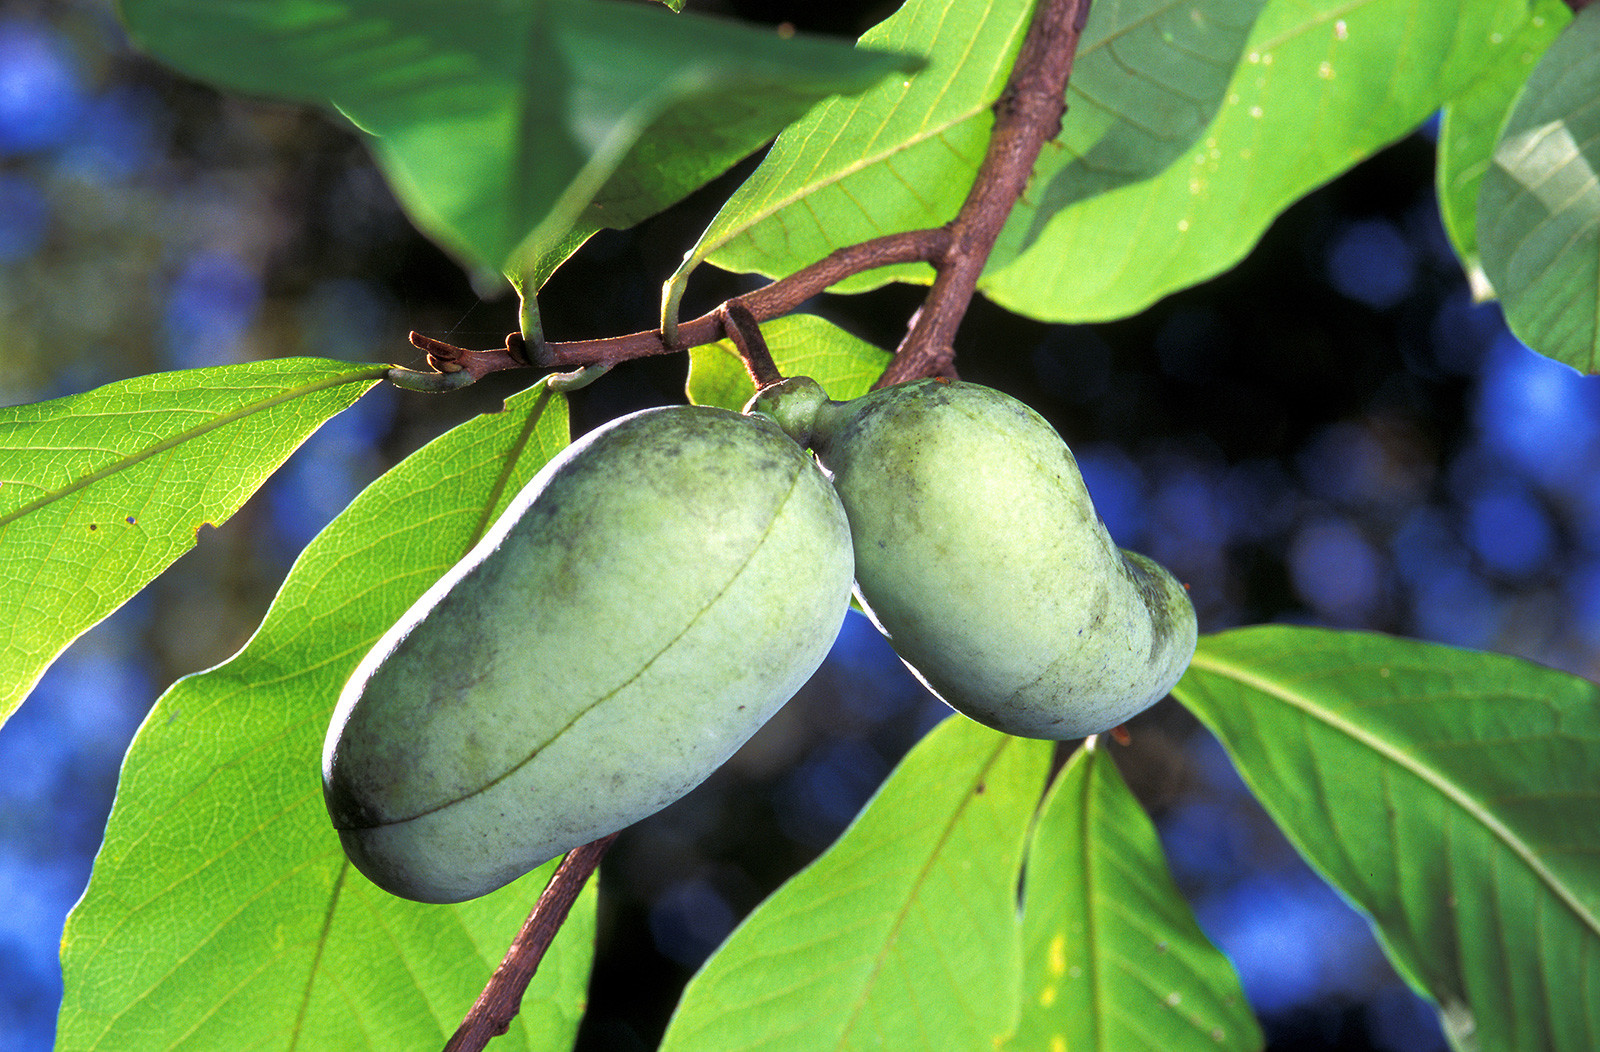 2 pawpaw fruits growing from a tree branch.